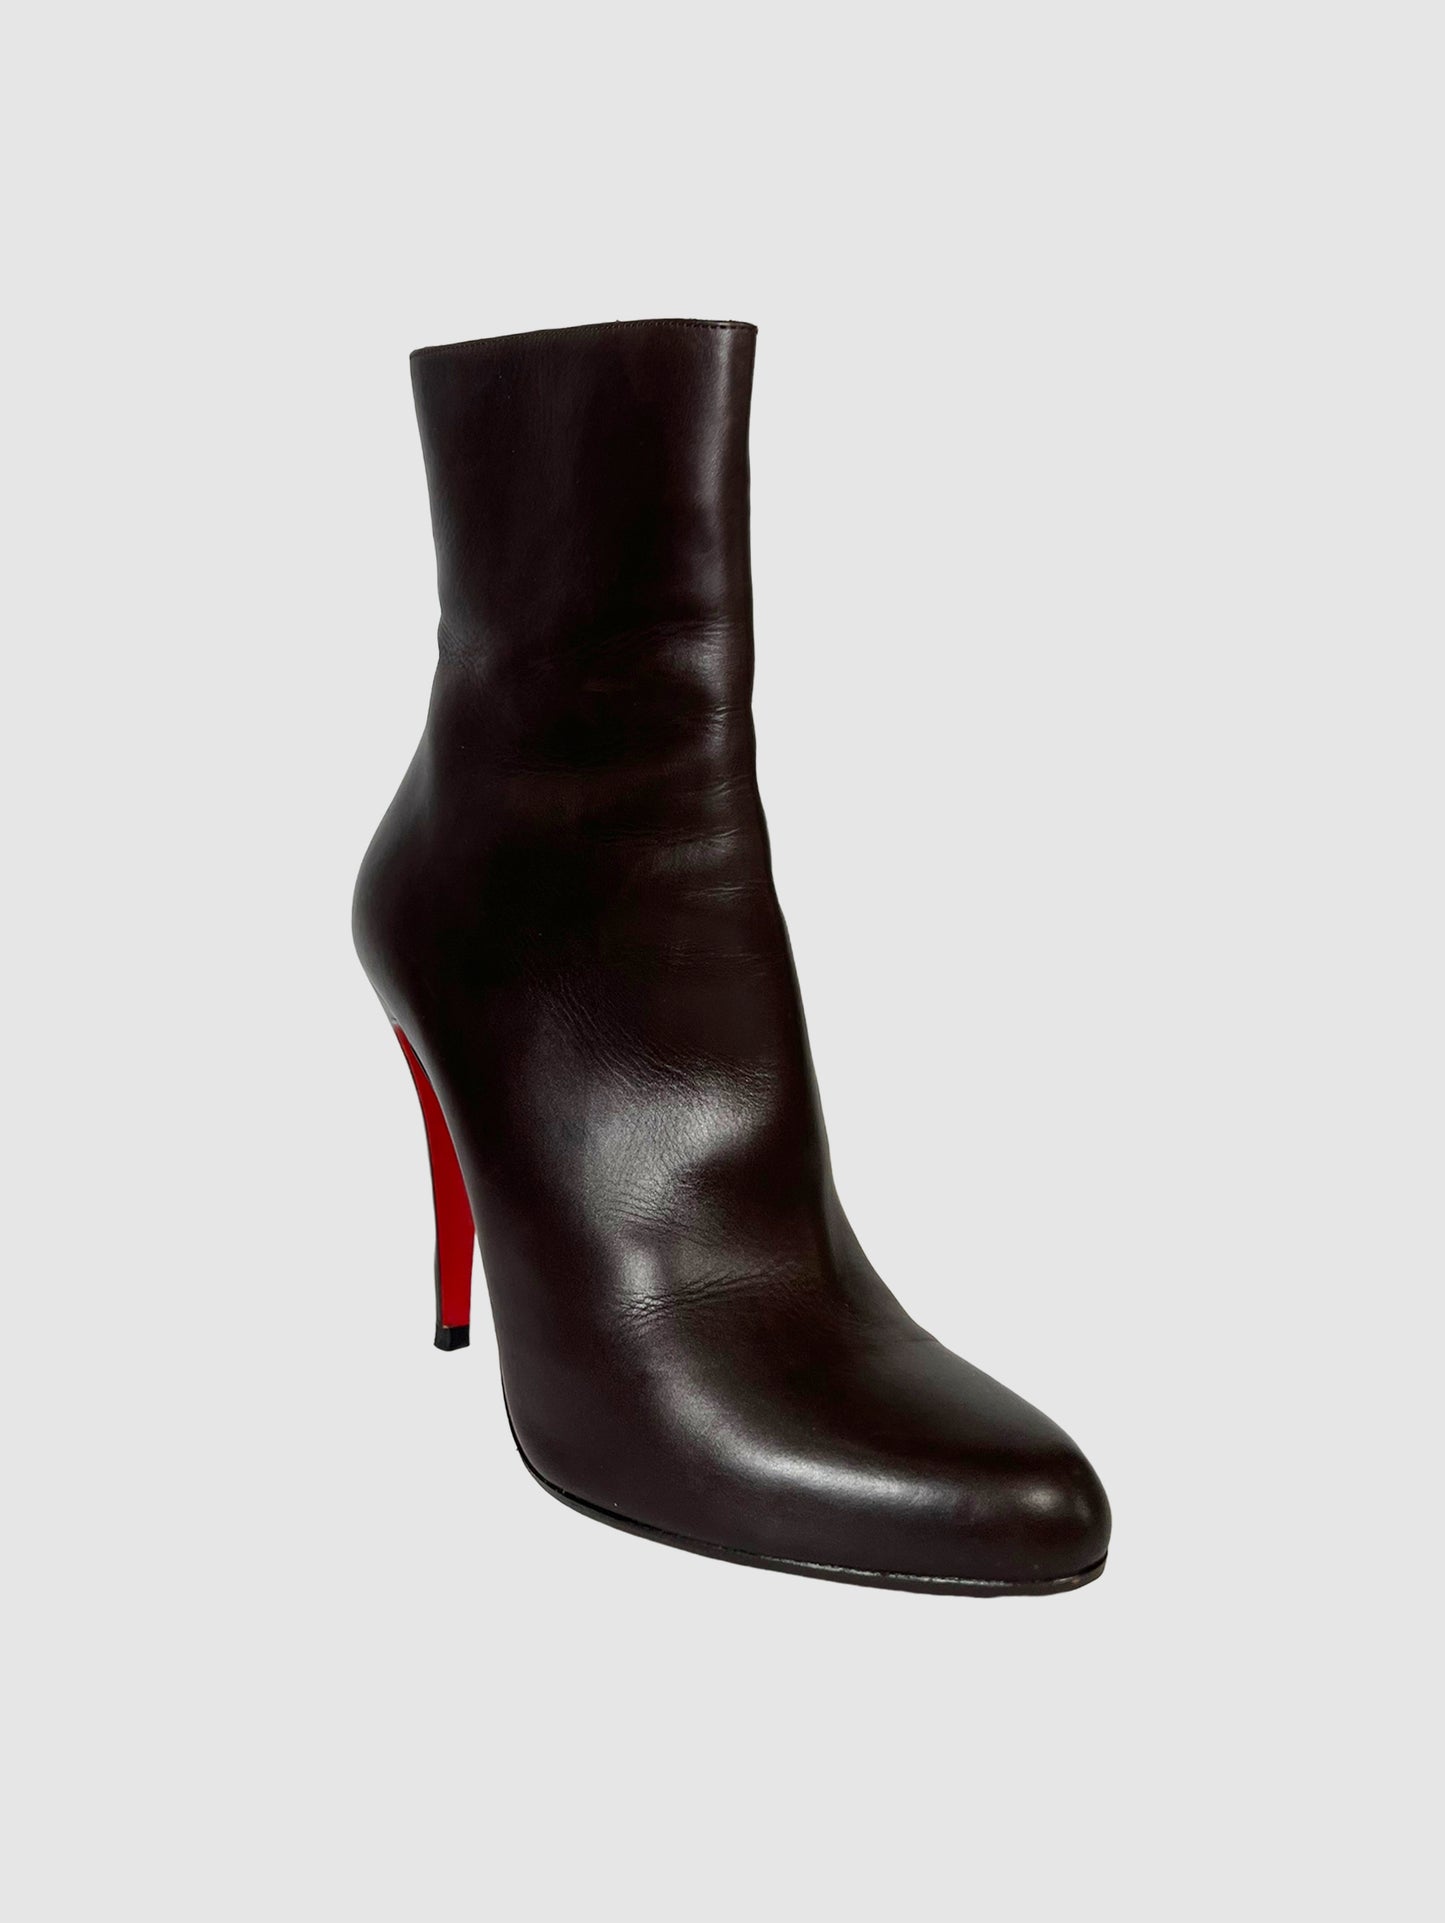 Christian Louboutin So Kate Brown Boots - Size 40